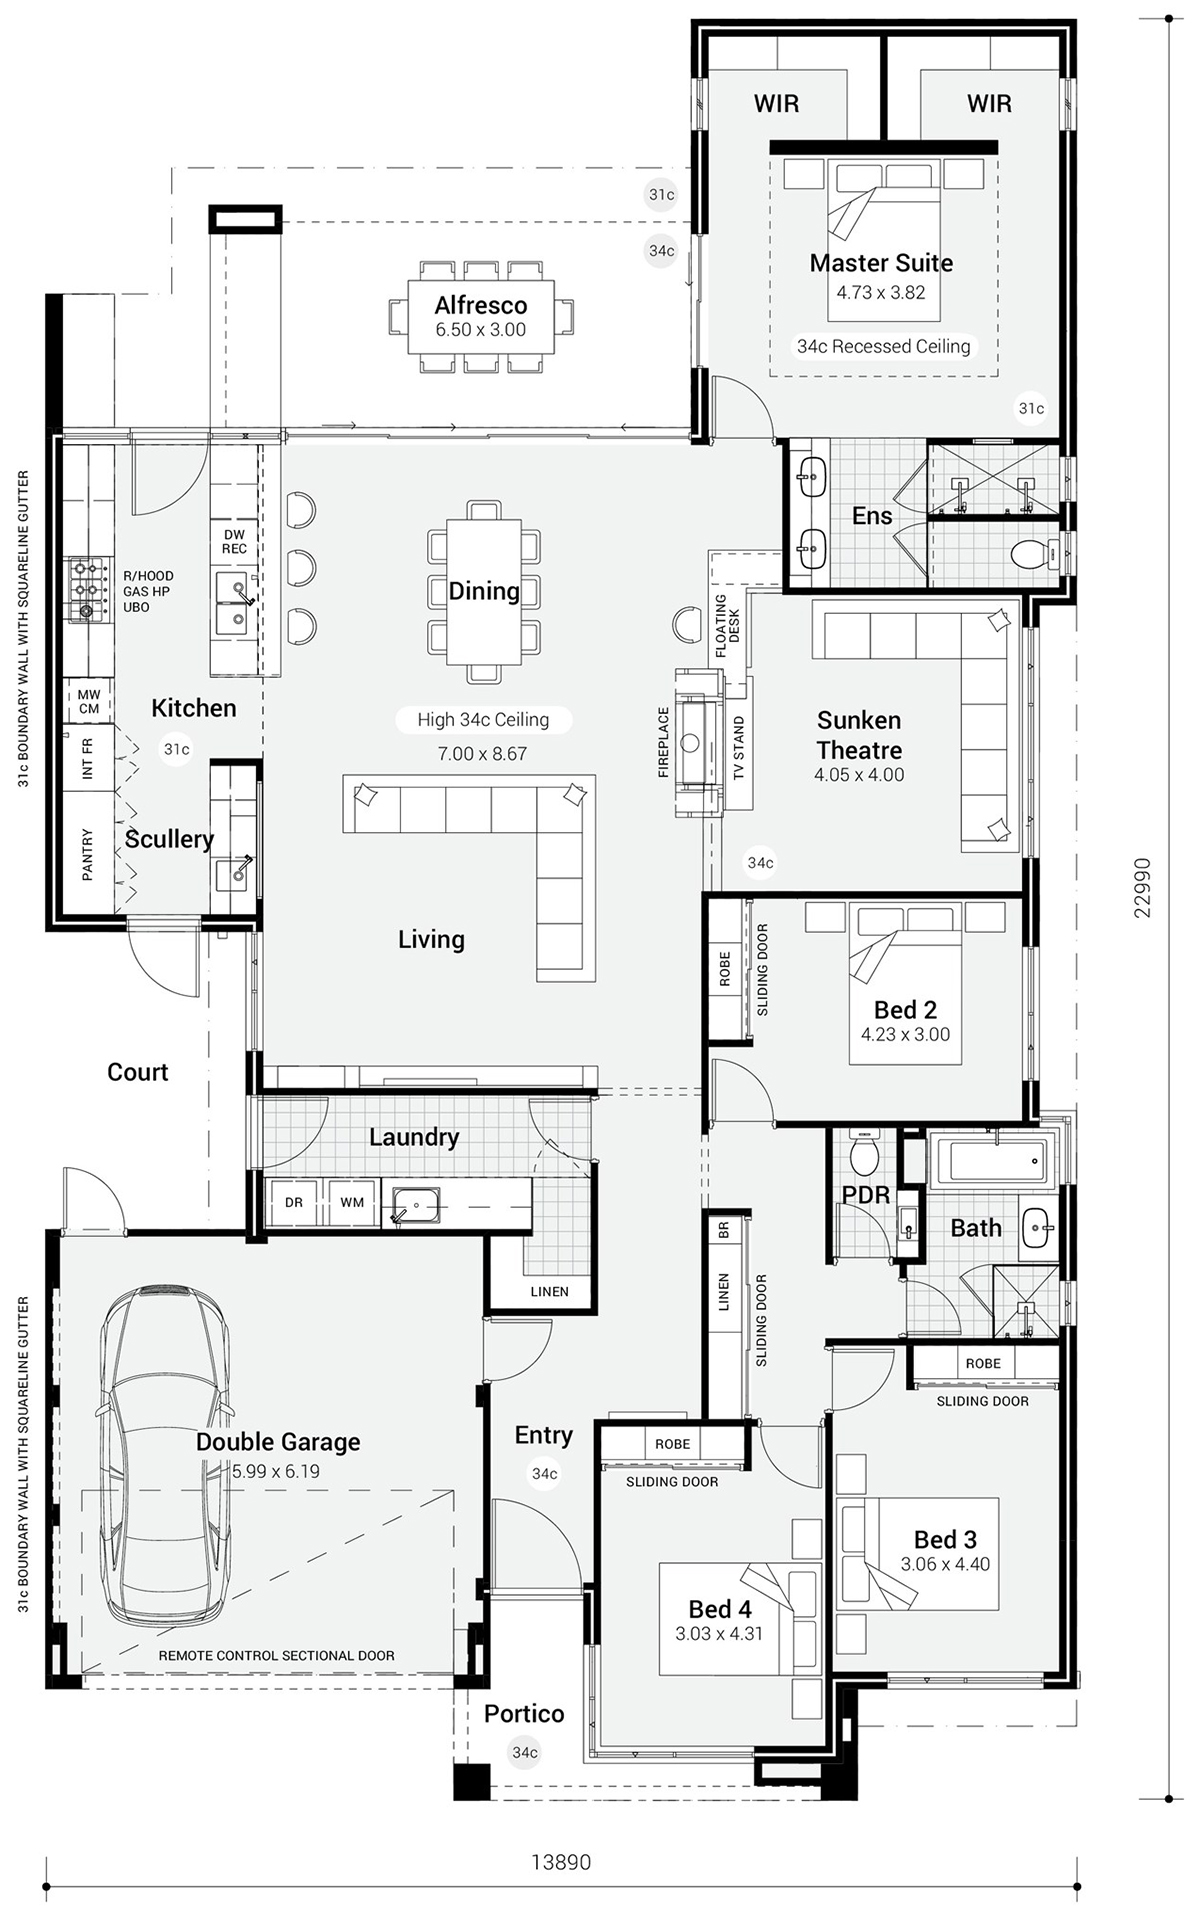 Floor Plan  Friday Chef s kitchen  scullery with servery 